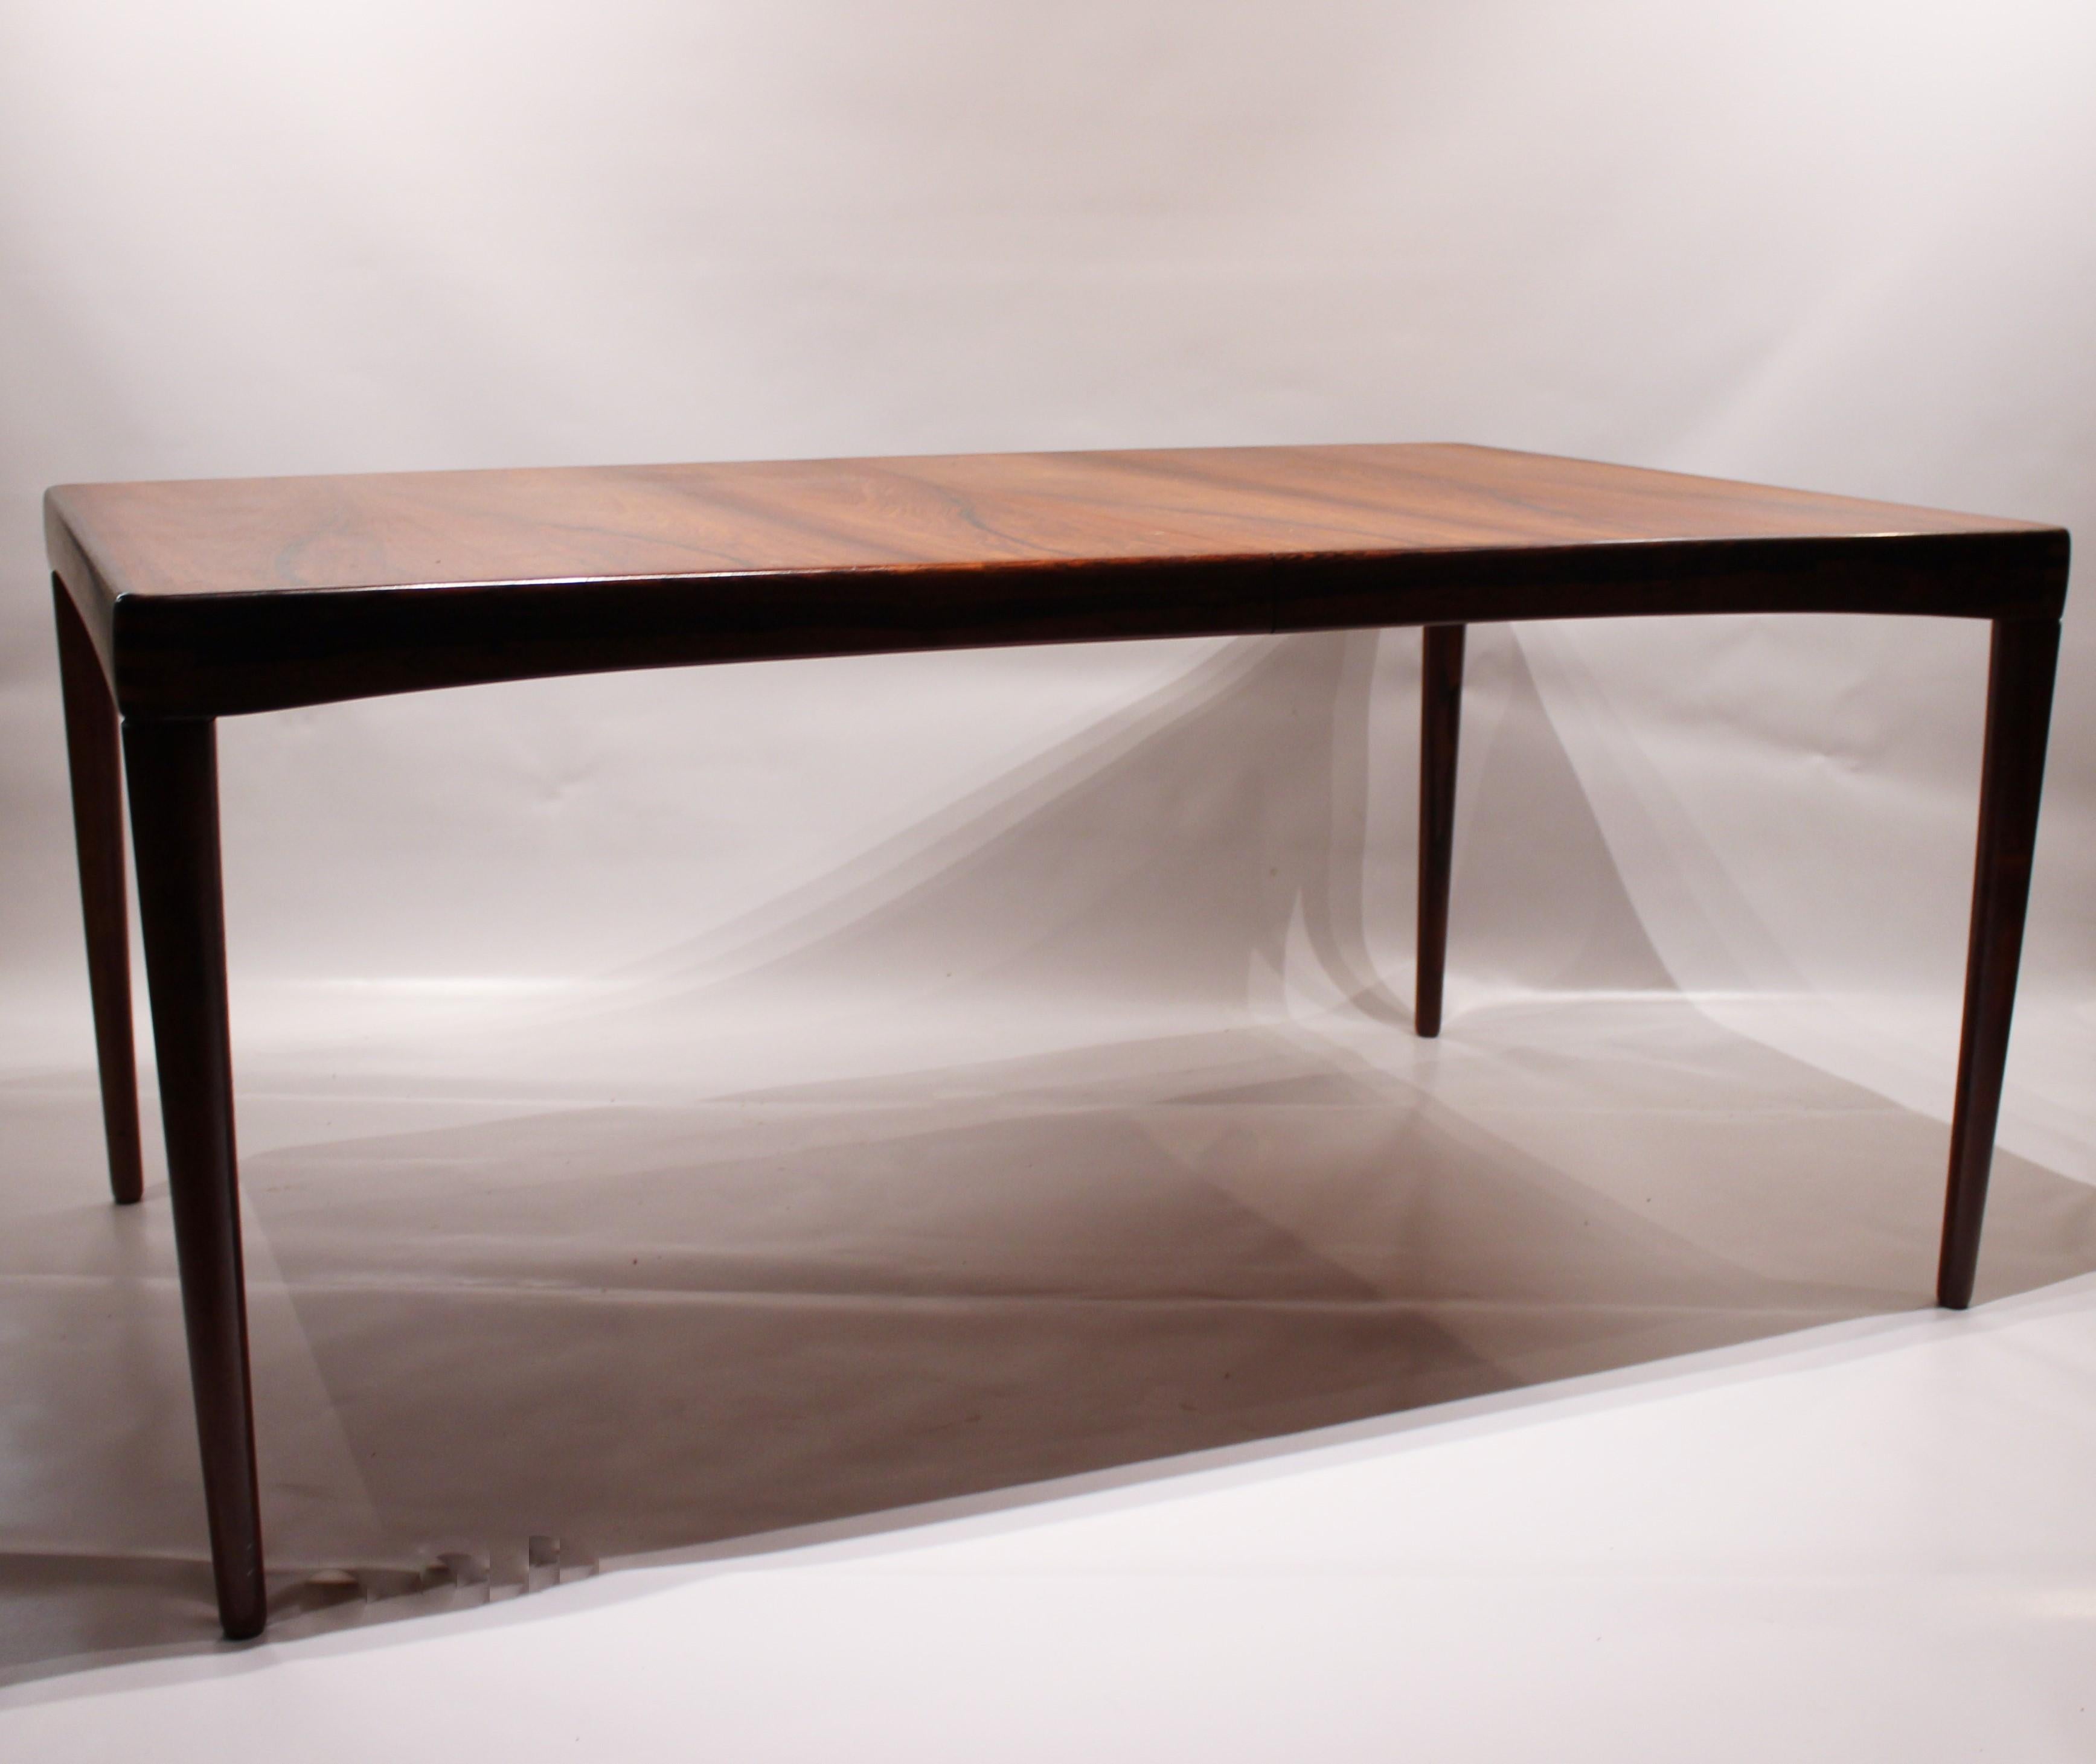 Dining table in rosewood designed by H.W. Klein and manufactured by Bramin furniture factory the 12th of October 1966. The table has one extension leaf and in great vintage condition.